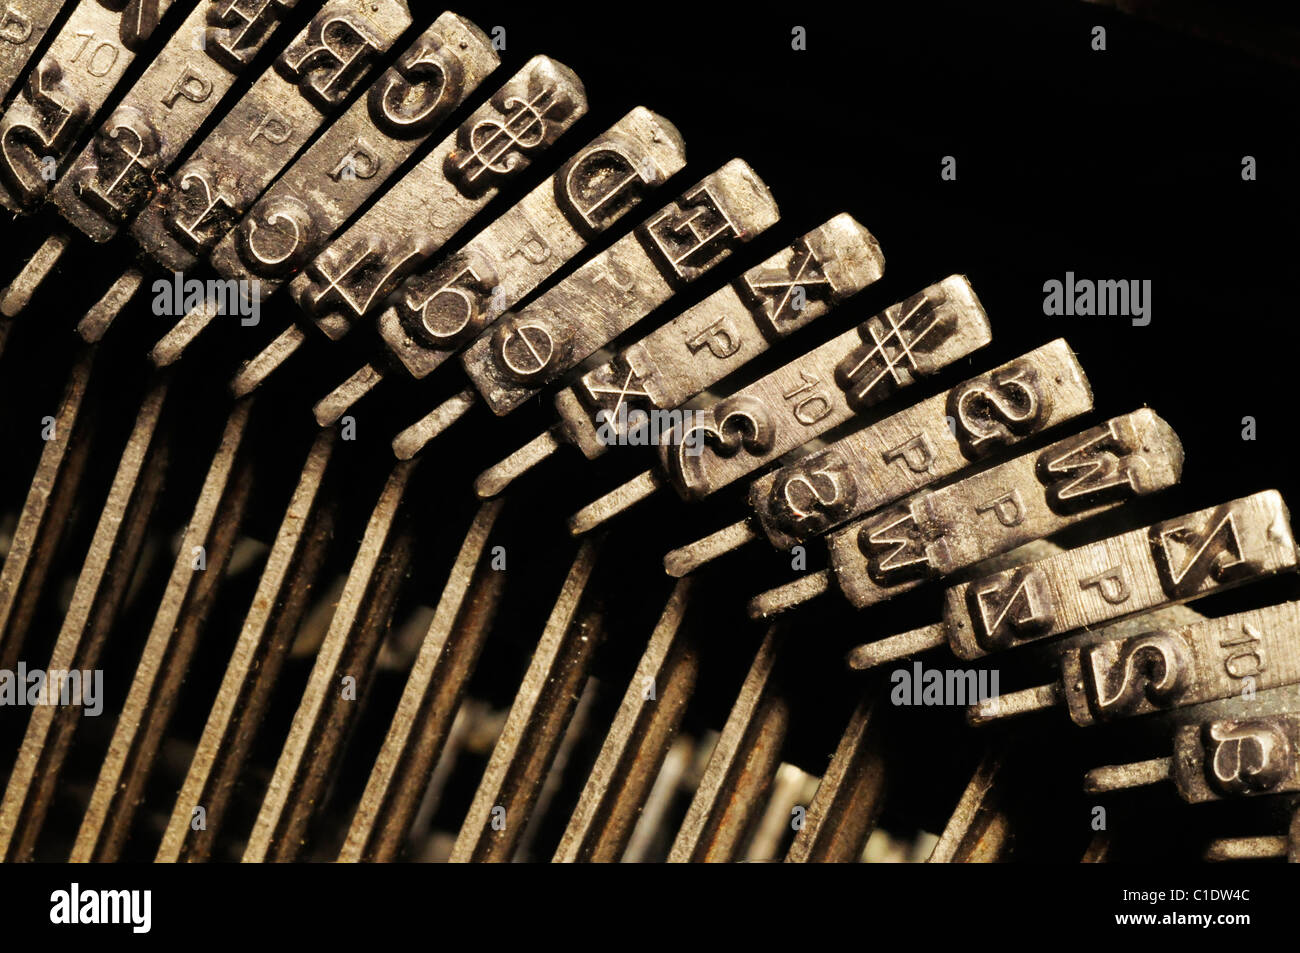 Close-up of the striking surface of old typewriter letter and symbol keys Stock Photo